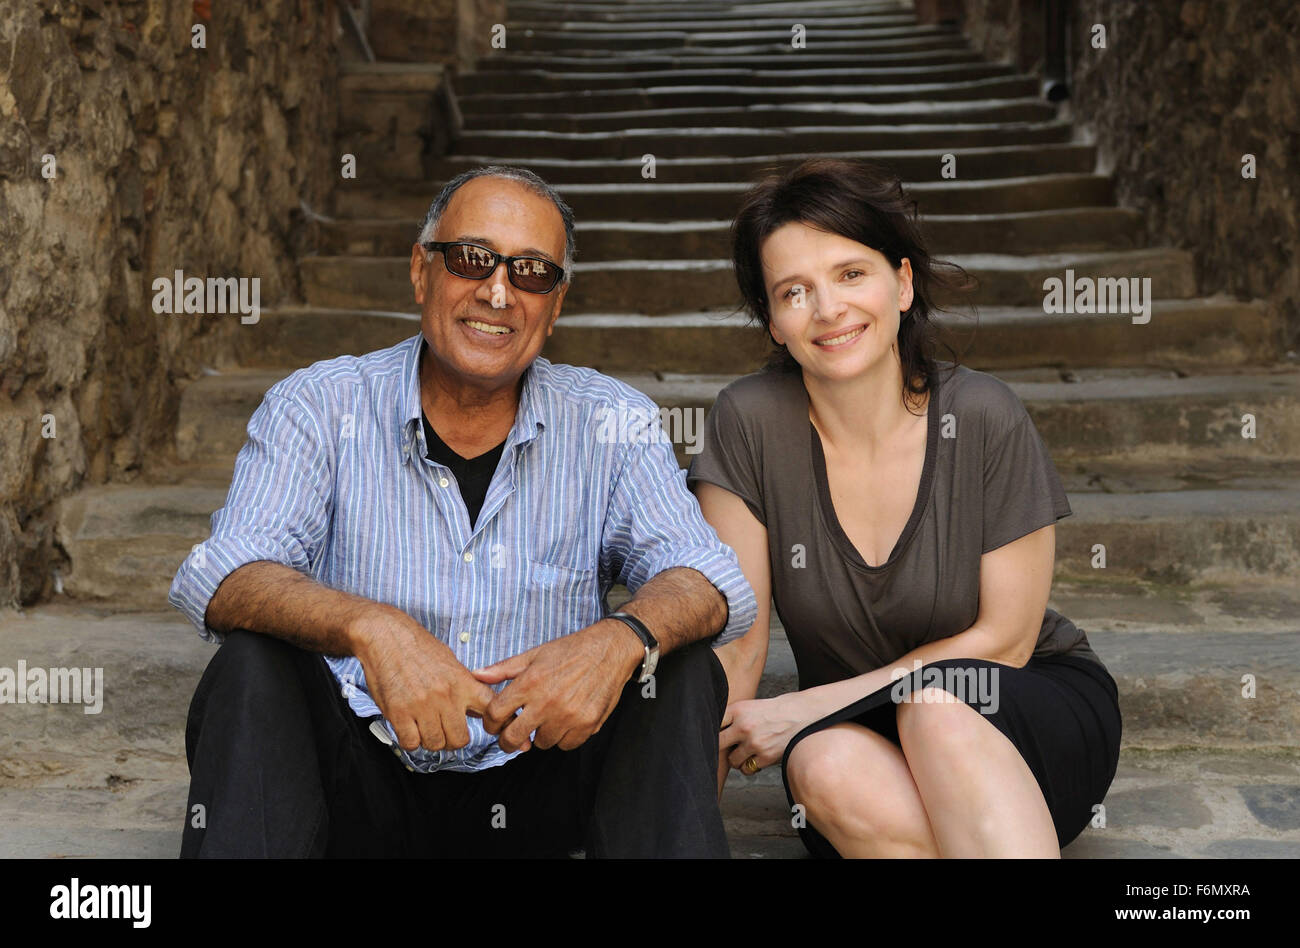 RELEASE DATE: October 1, 2010. MOVIE TITLE: Certified Copy. STUDIO: MK2 Productions. PLOT: In Tuscany to promote his latest book, a middle-aged English writer meets a French woman who leads him to the village of Lucignano. PICTURED: JULIETTE BINOCHE and ABBAS KIAROSTAMI the director. Stock Photo